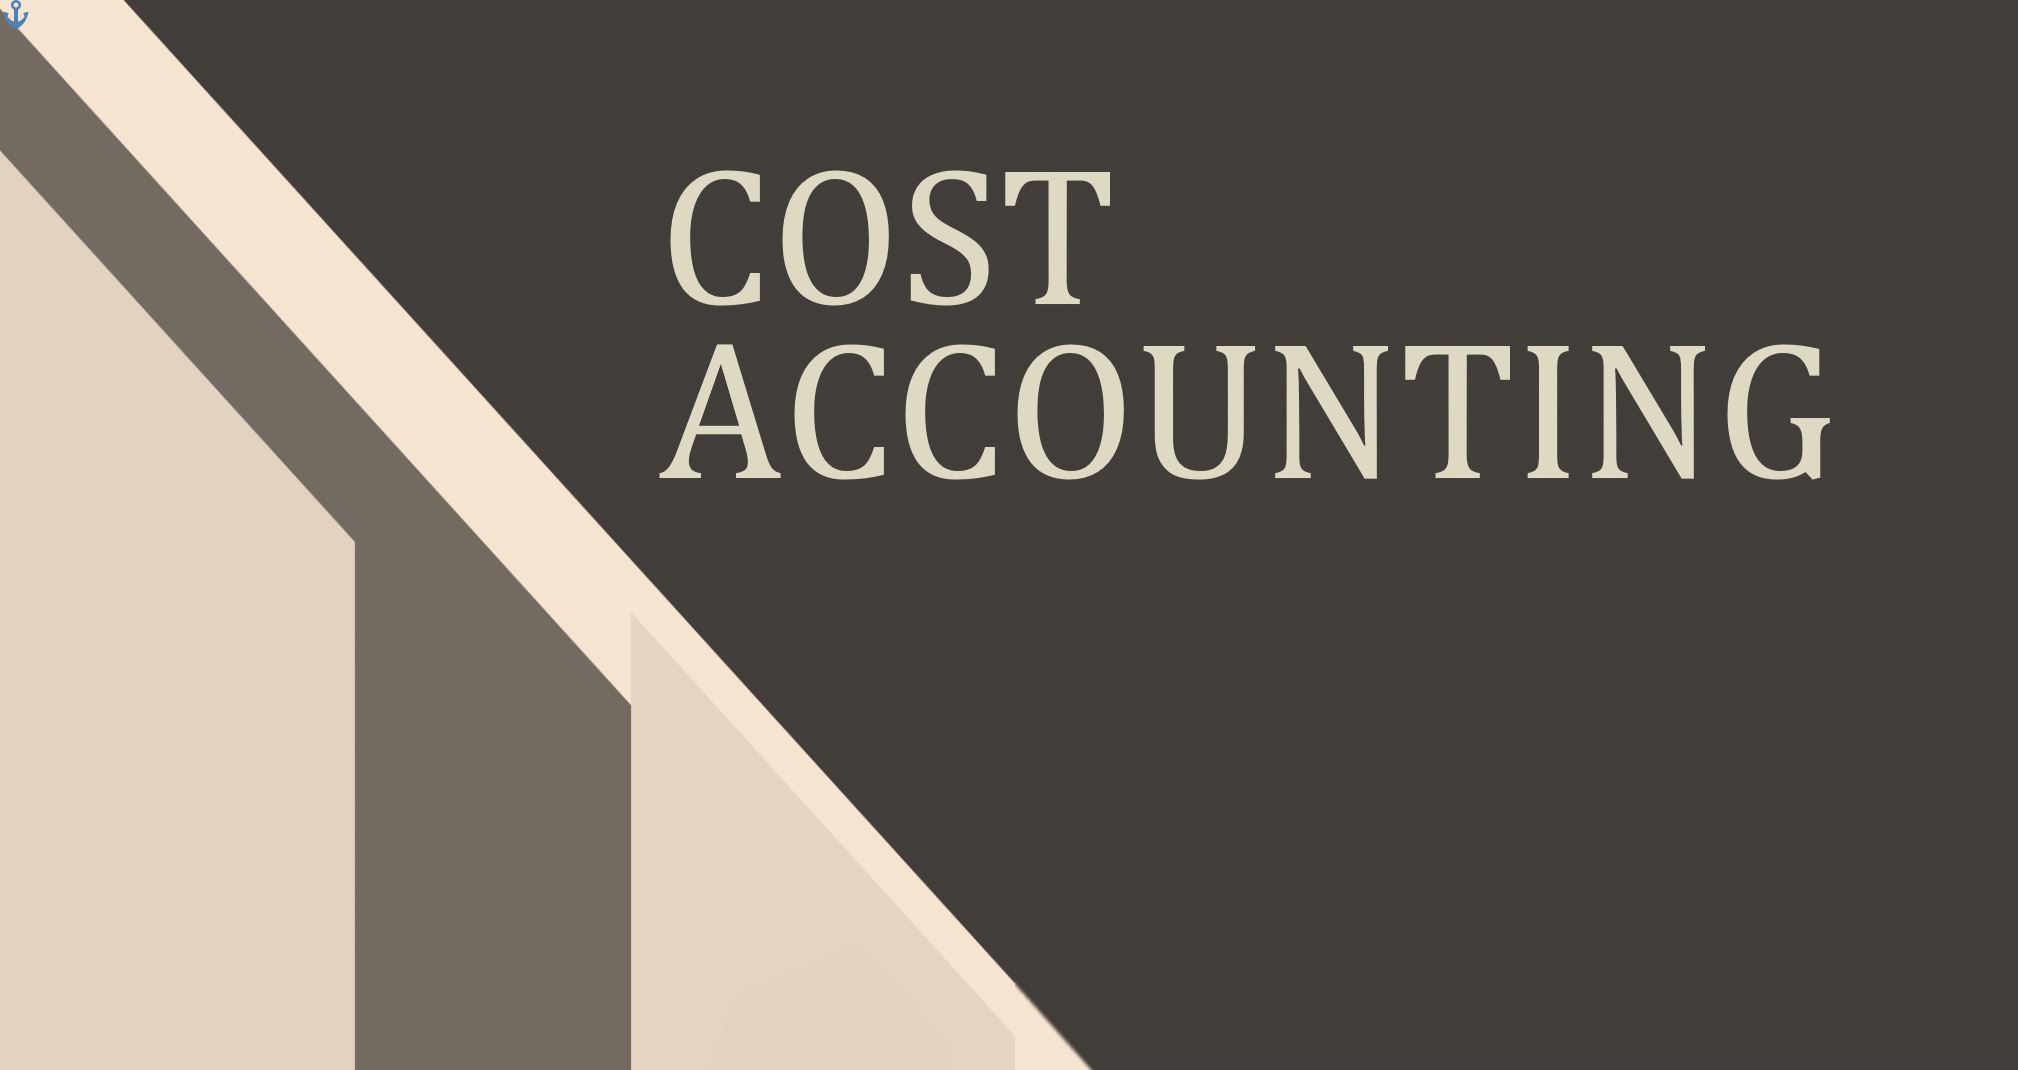 A4: Cost Accounting